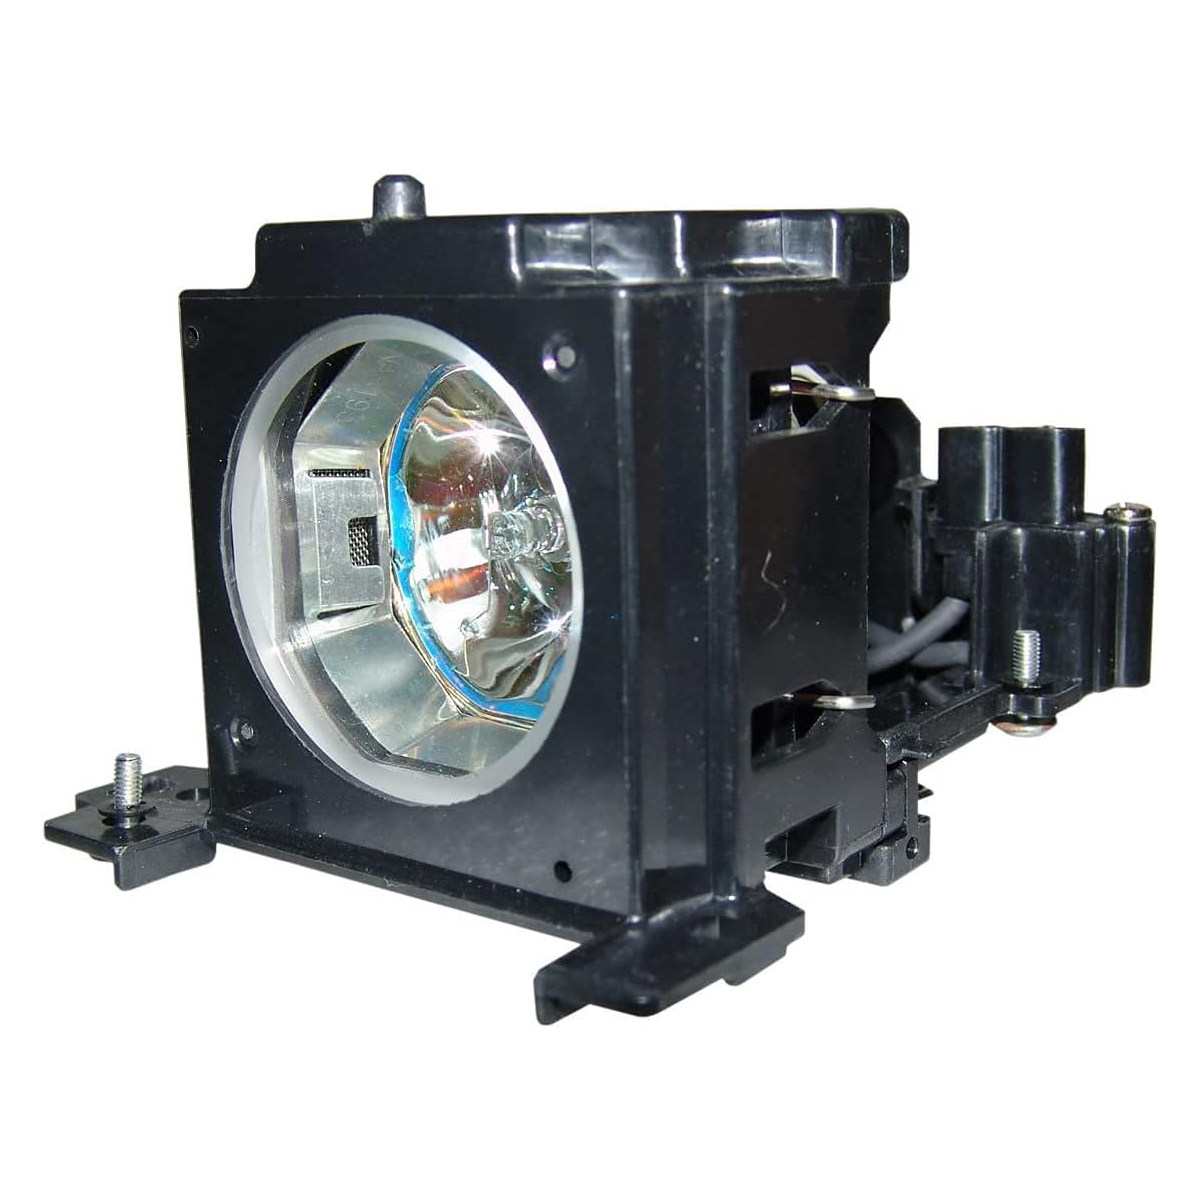 Replacement Projector lamp RLC-020 For VIEWSONIC PJ658D